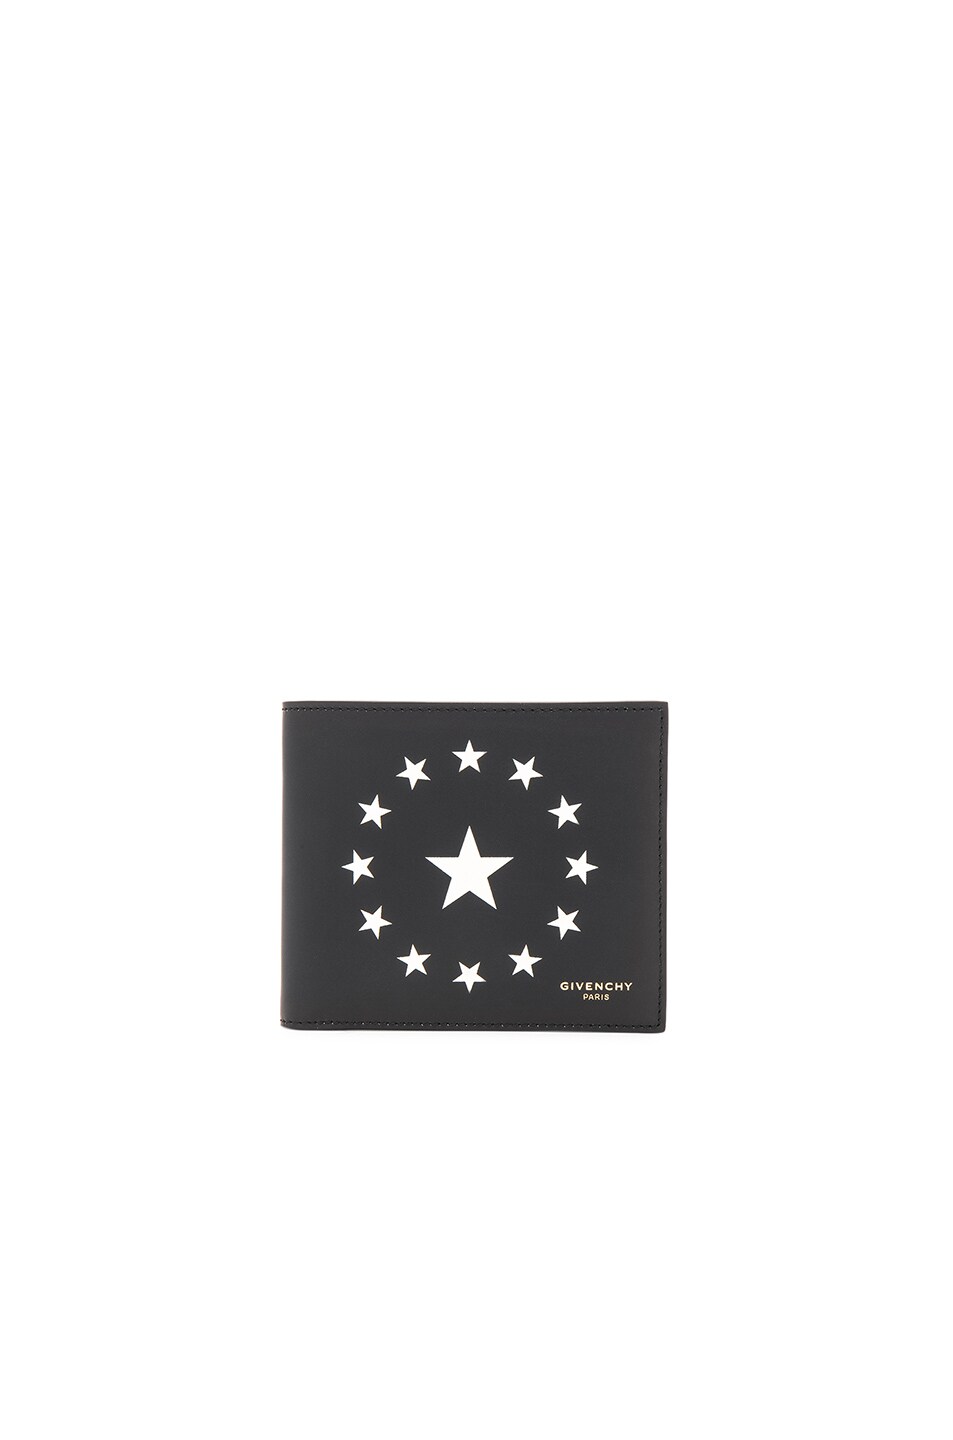 Image 1 of Givenchy Star Print Billfold Wallet in Black & White